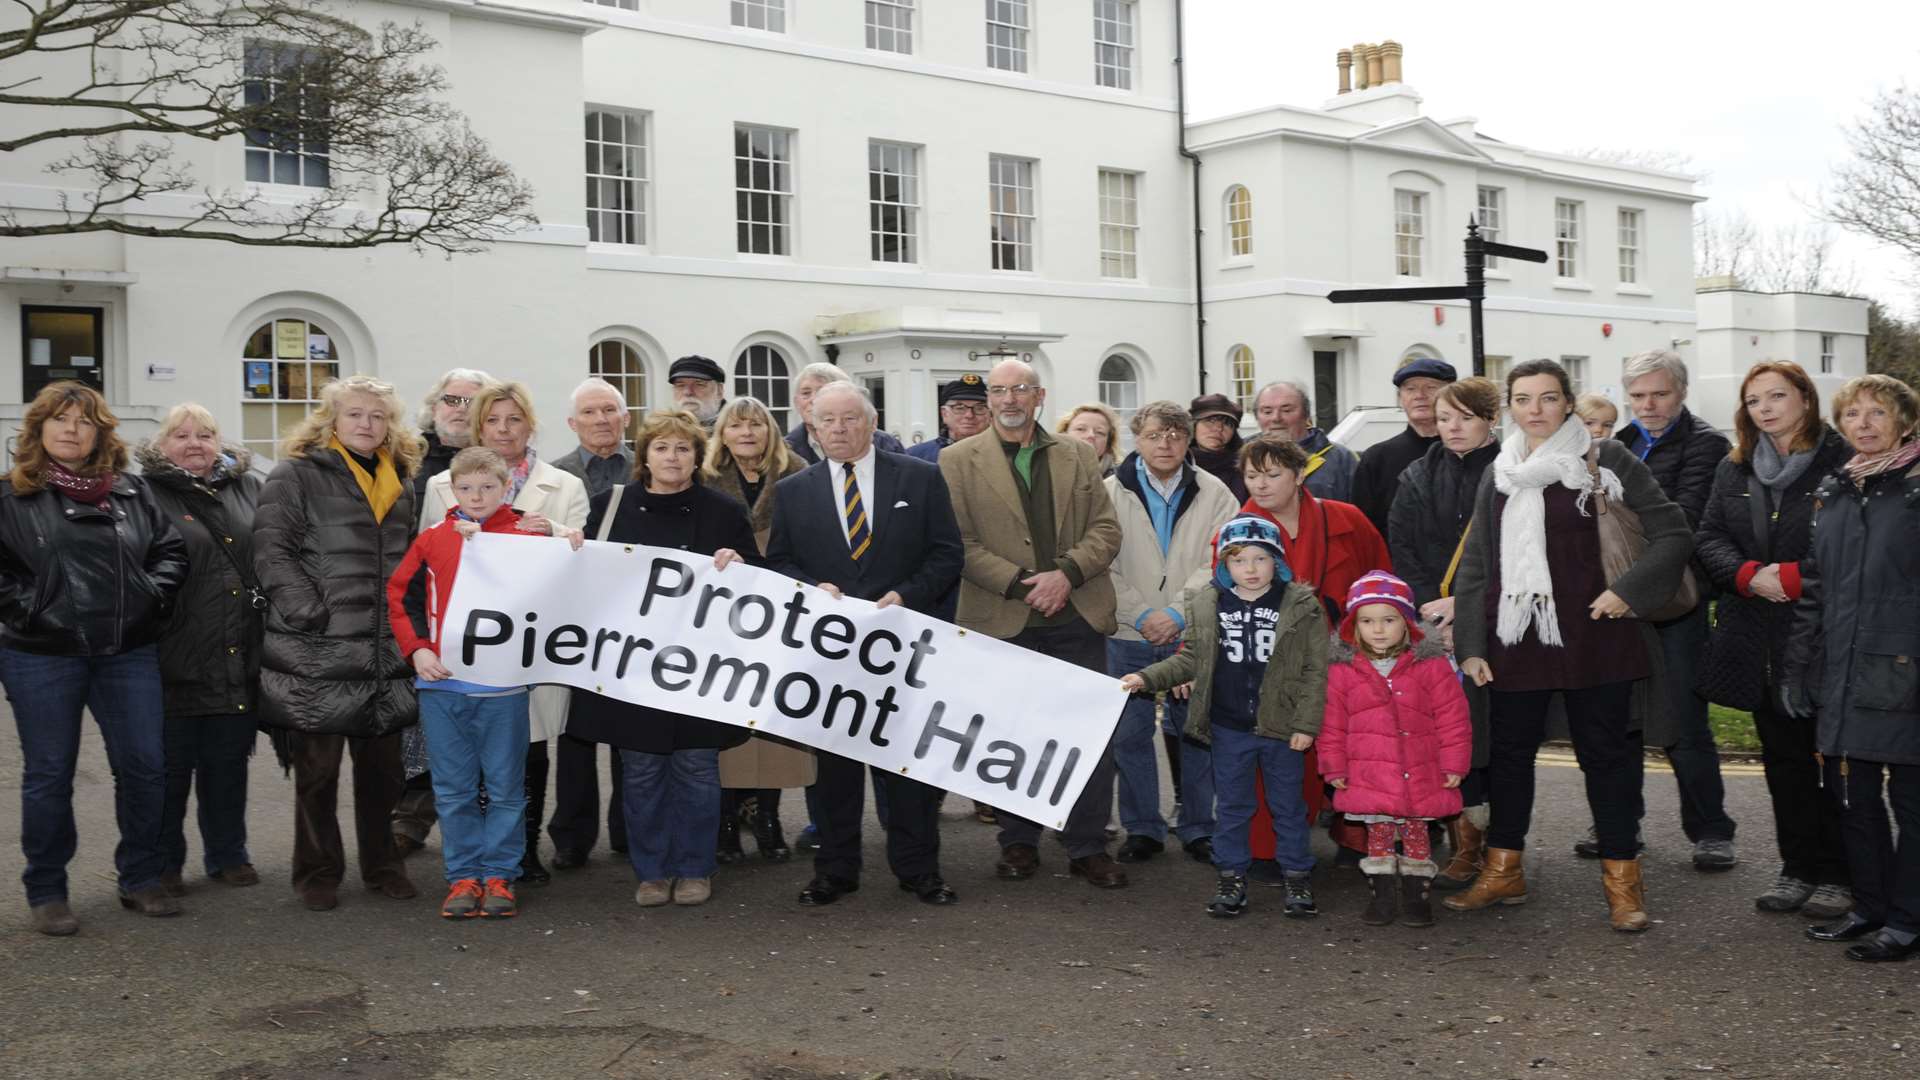 Campaigners calling for the protection of Pierremont Hall